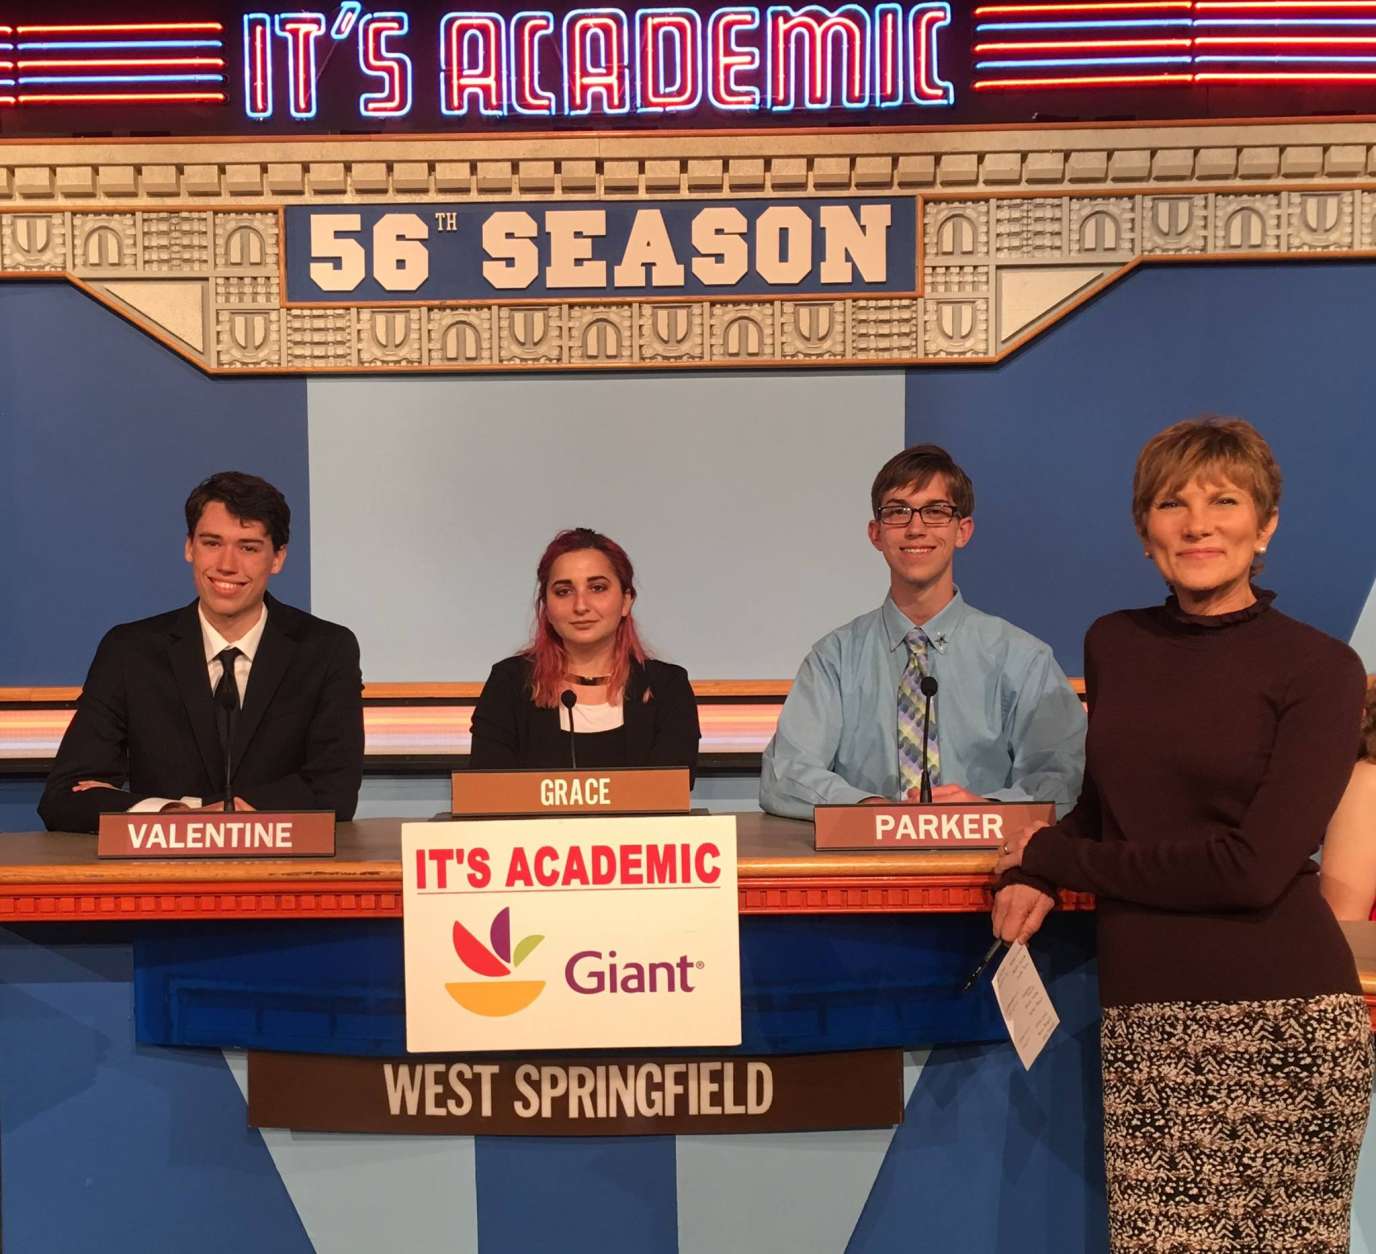 On "It's Academic," West Springfield High School competed against Chantilly and Suitland high schools. The show aired Jan. 21, 2017. (Courtesy Facebook/It's Academic)